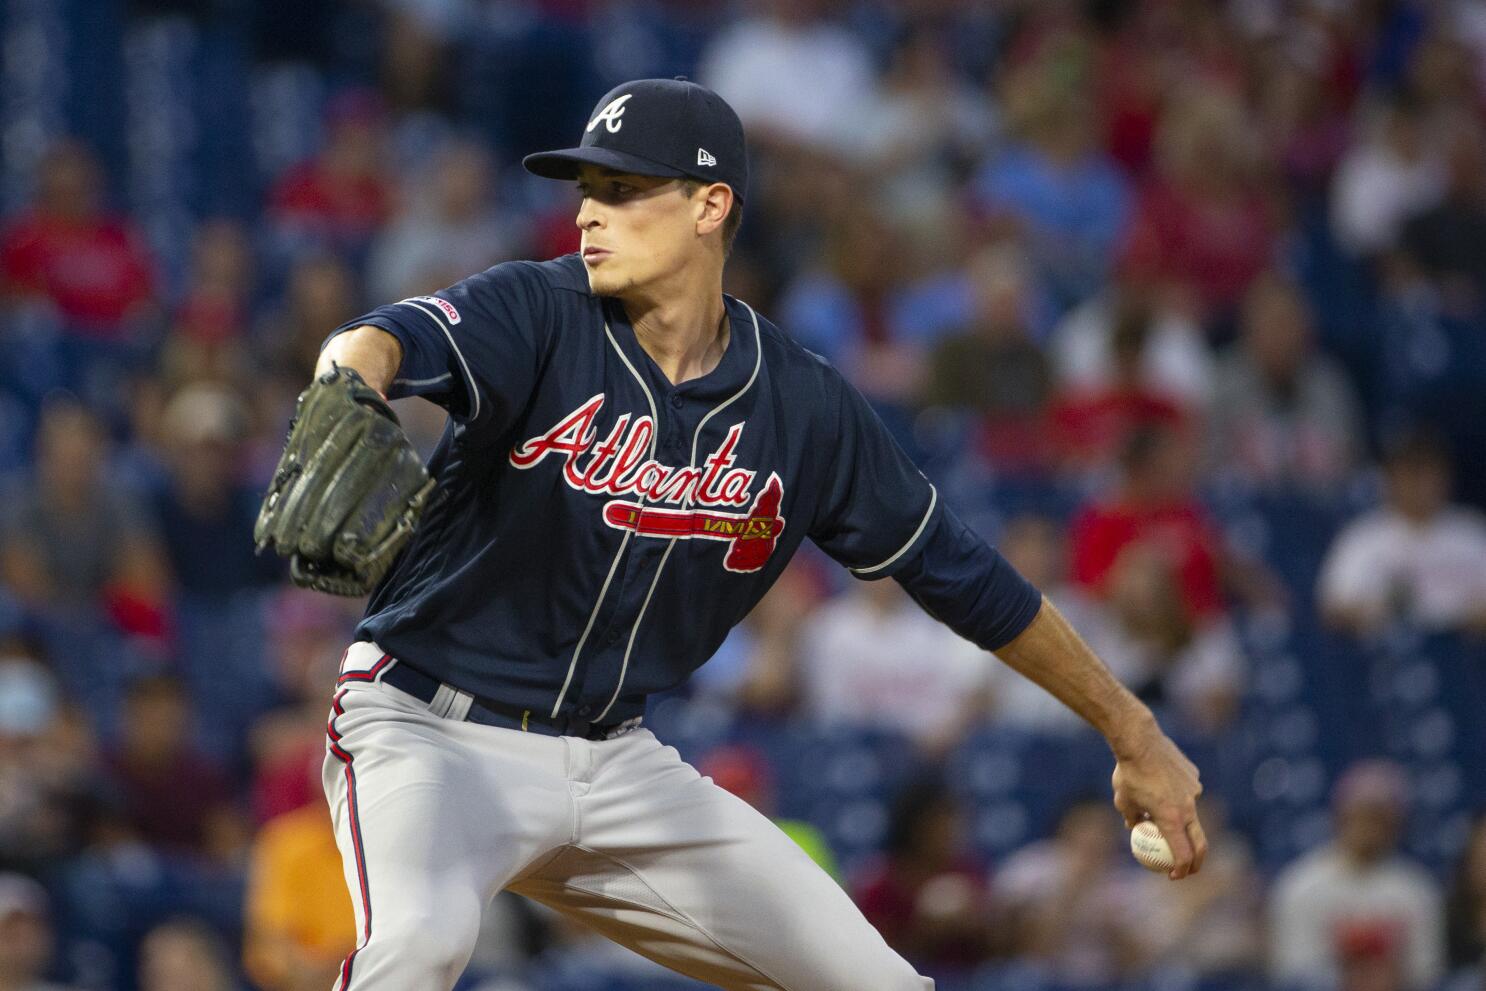 Braves preview: Max Fried starts as Atlanta goes for series win vs